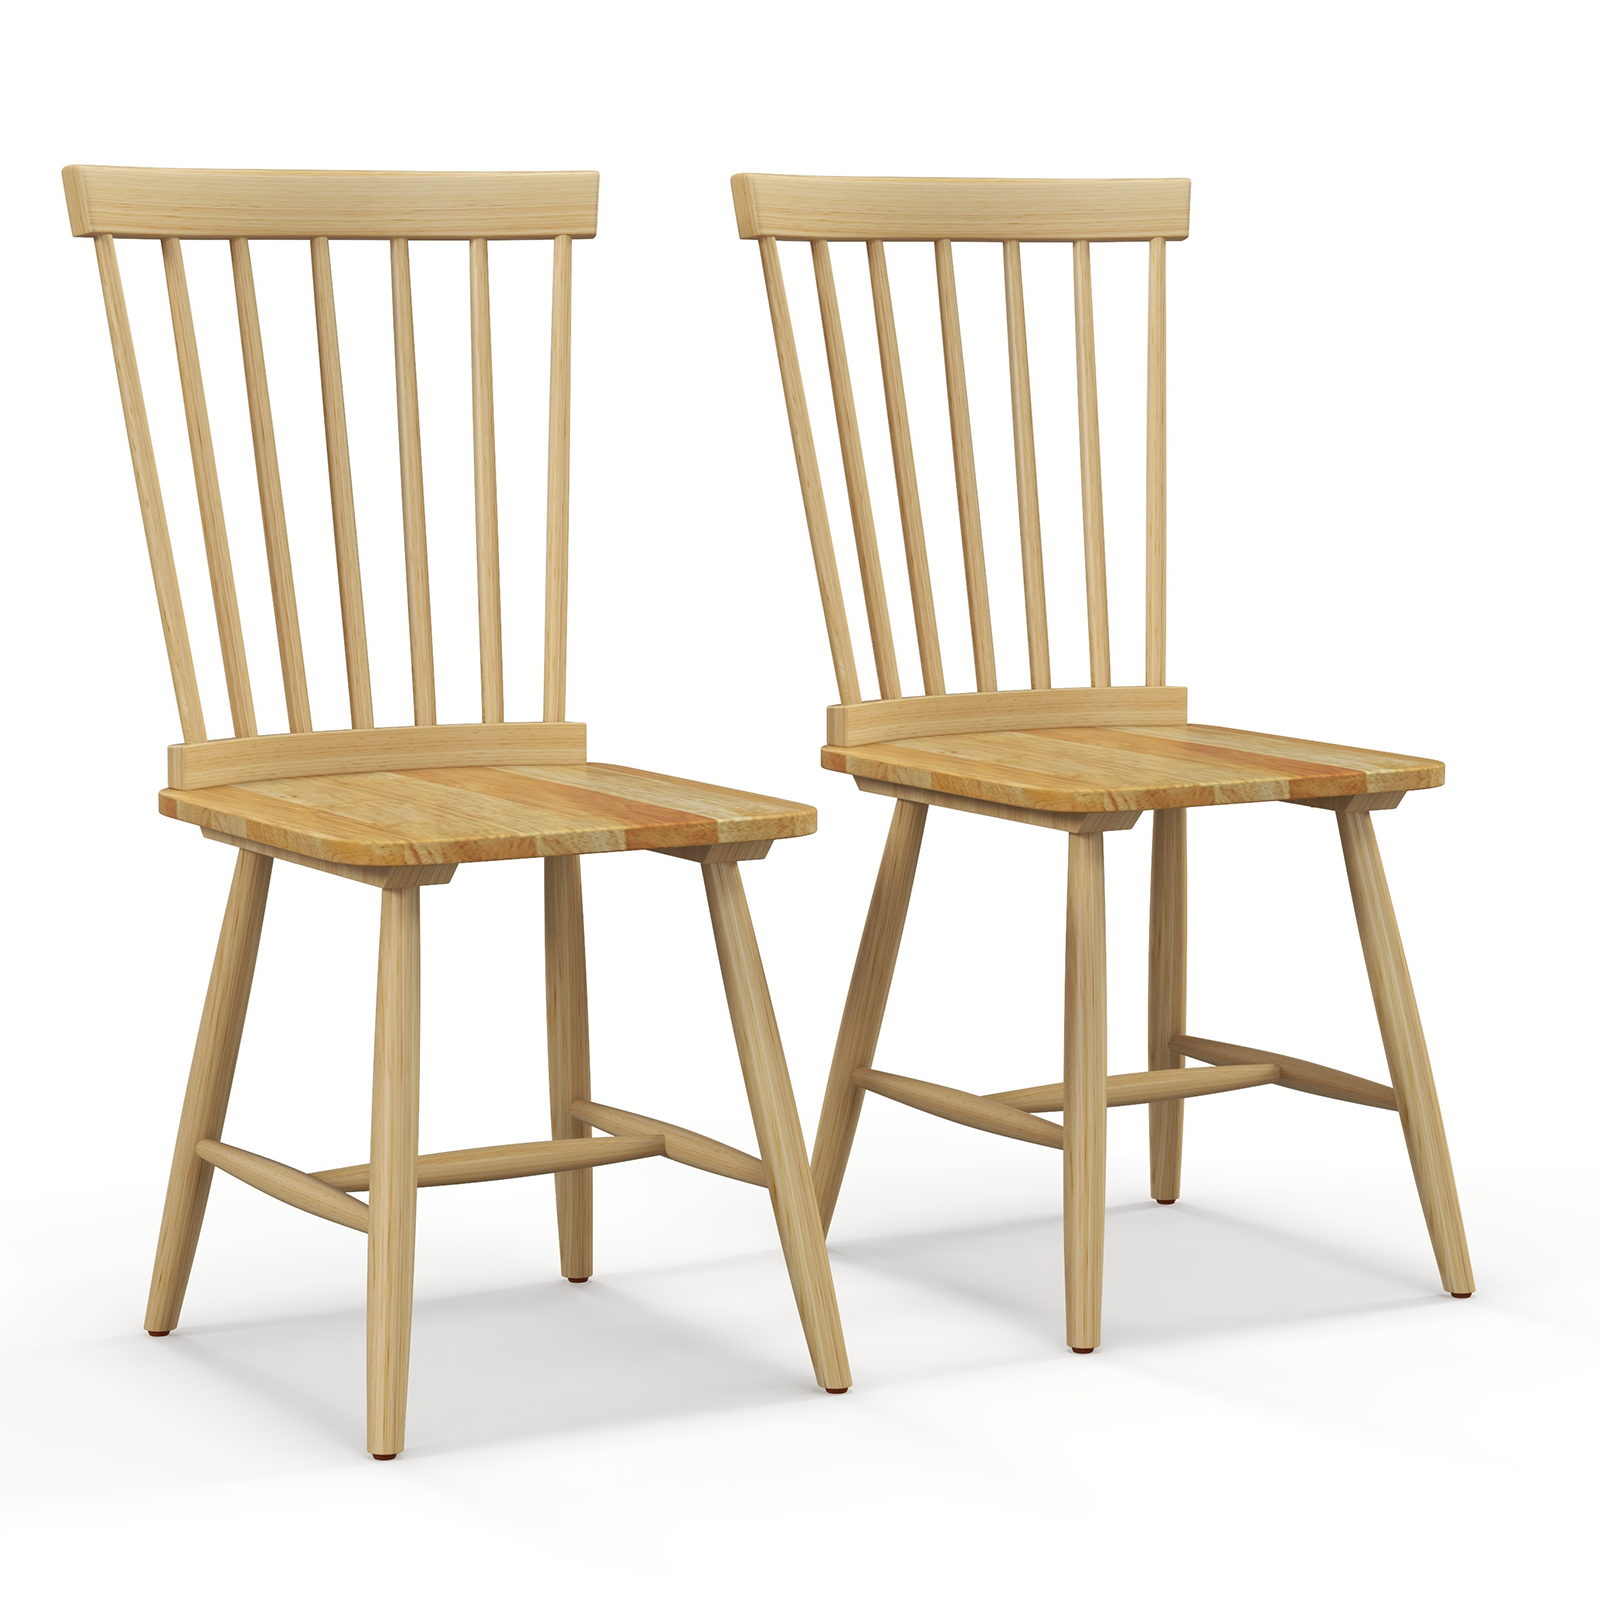 Set of 2 Windsor Style Armless Dining Chairs with Ergonomic Spindle Backs-Natural